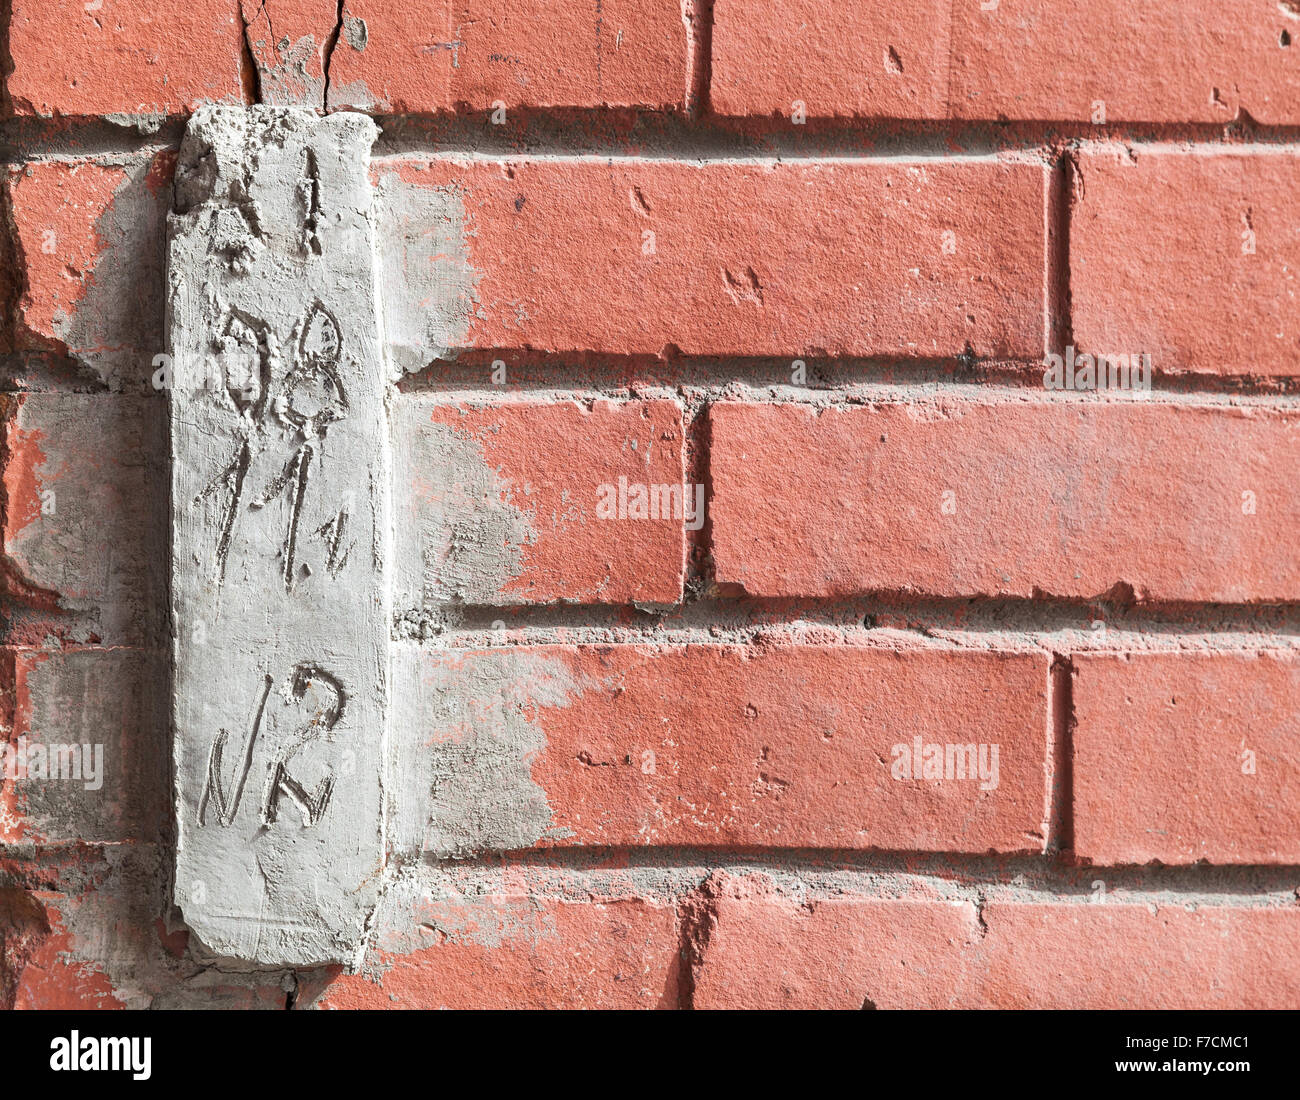 Special concrete block with installation date for observing cracks in red brick wall Stock Photo